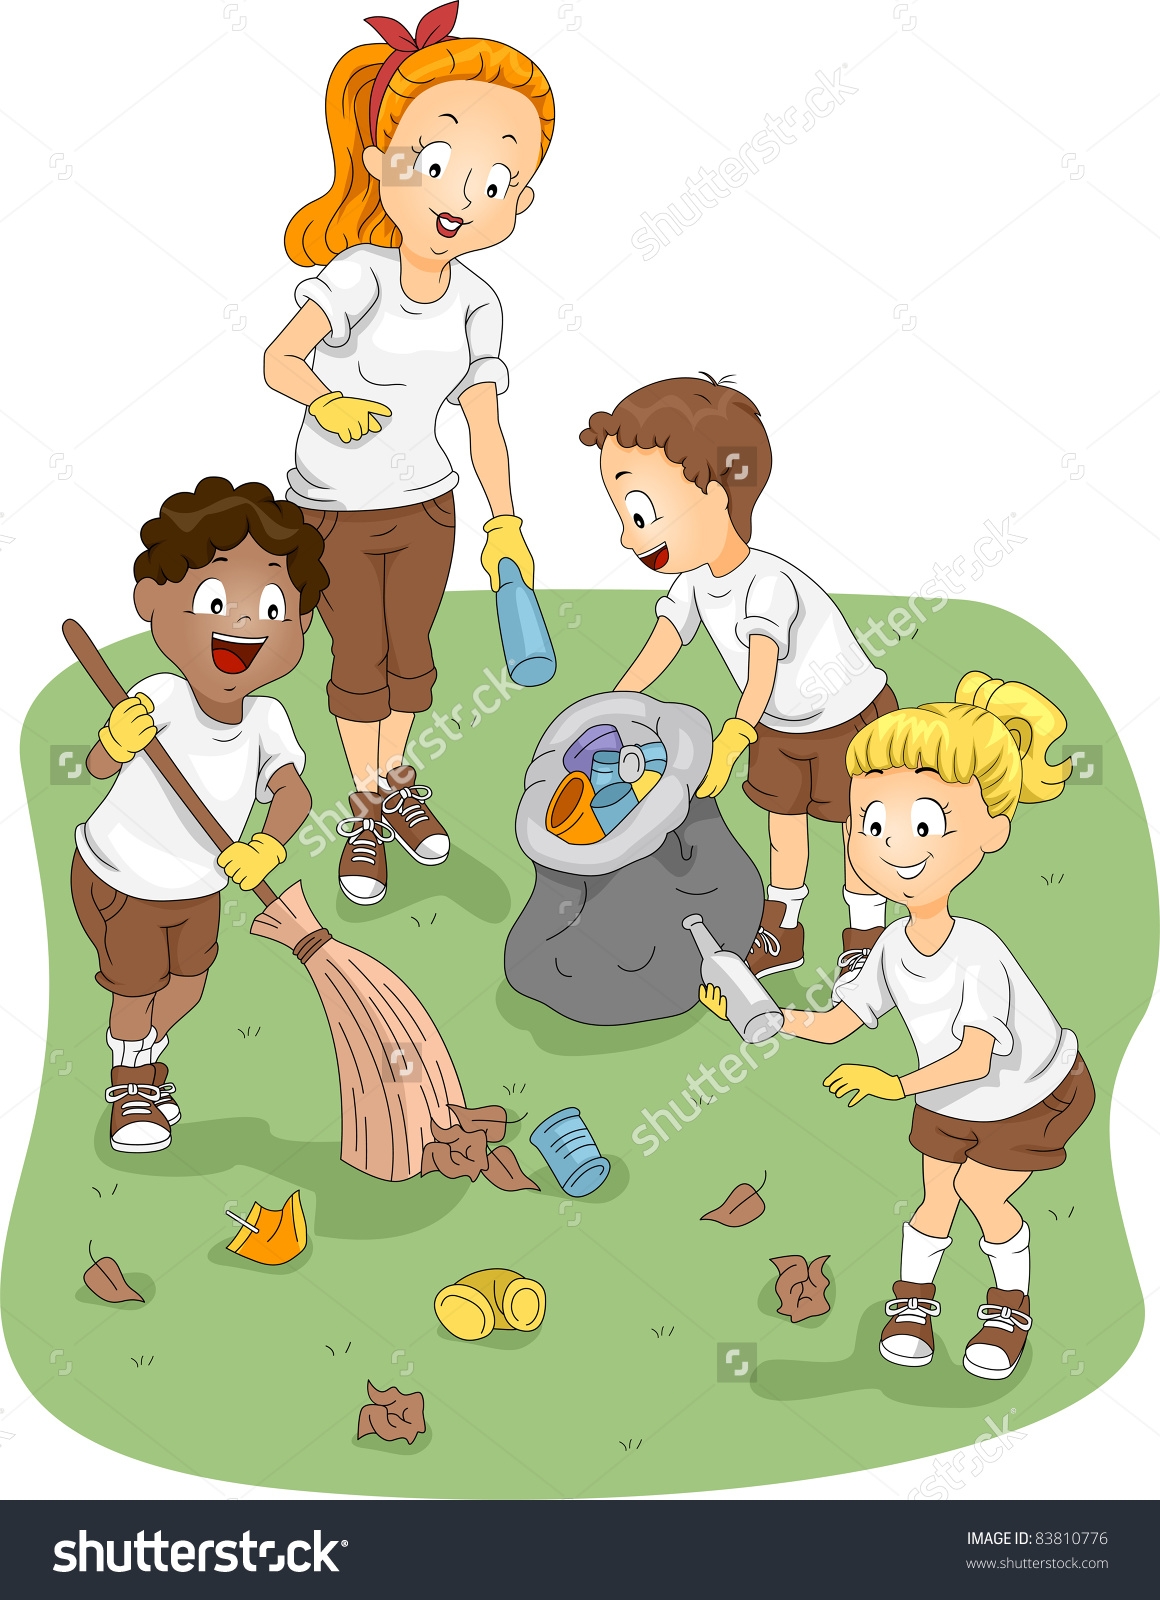 Cleaning the surroundings . Environment clipart clean